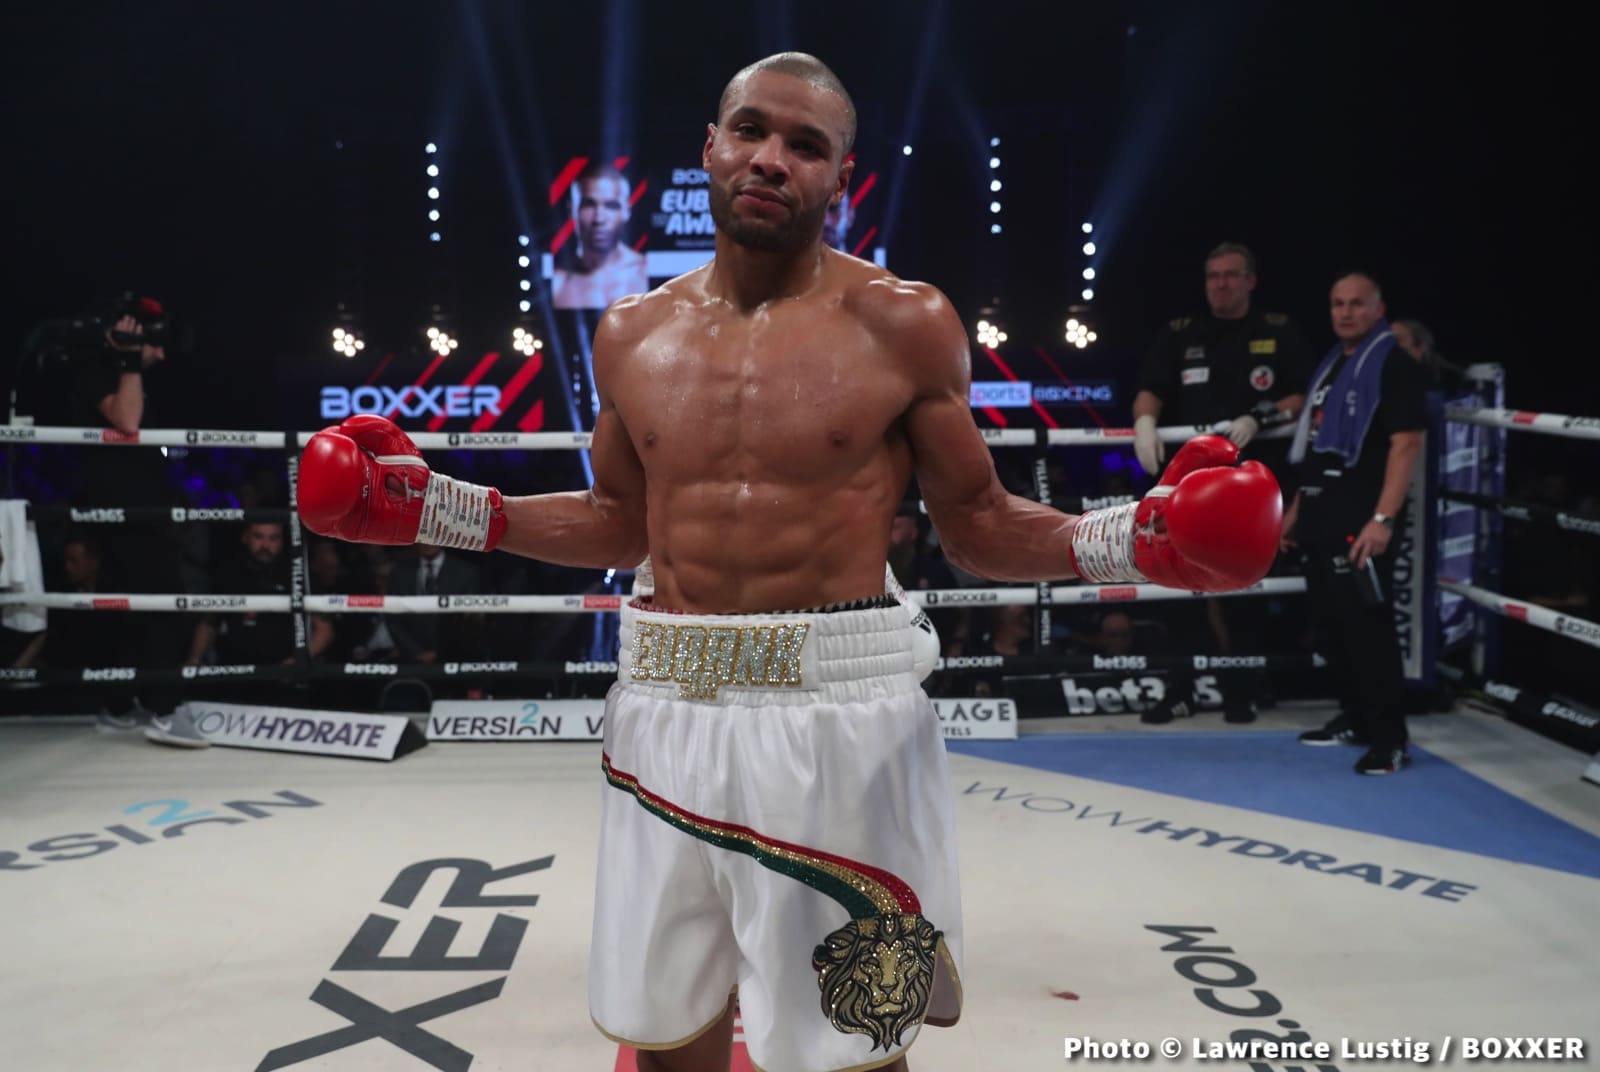 Image: Eubank Jr: 'I'm looking 100% to fight Golovkin' after Williams